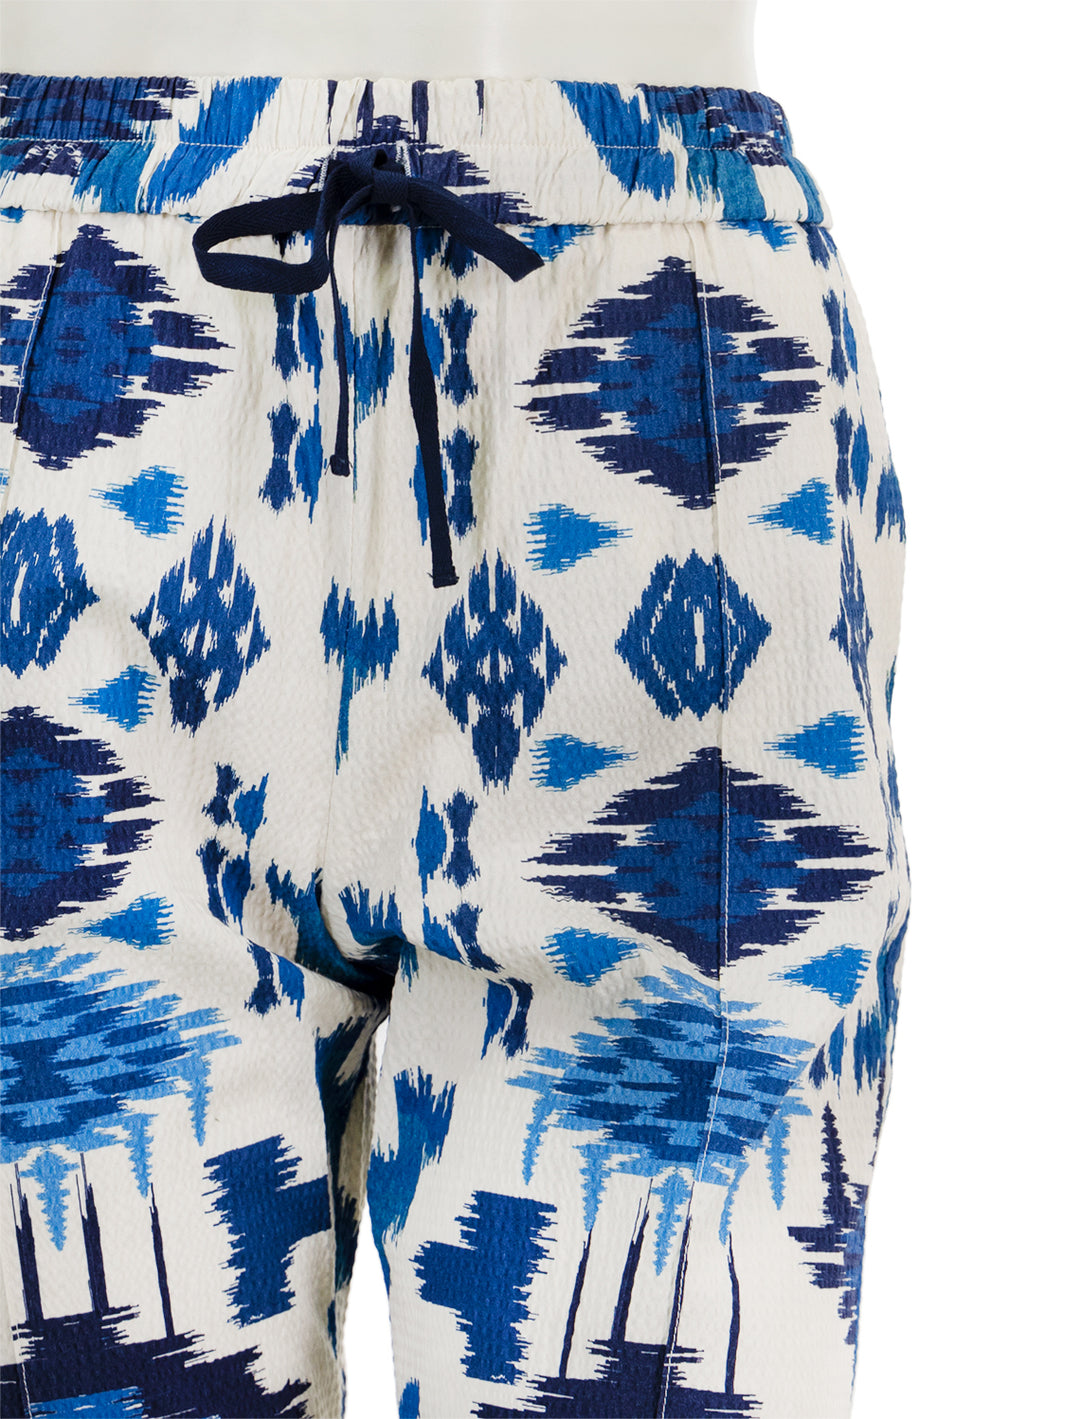 Close-up view of Vilagallo's clarise pant in blue ikat.